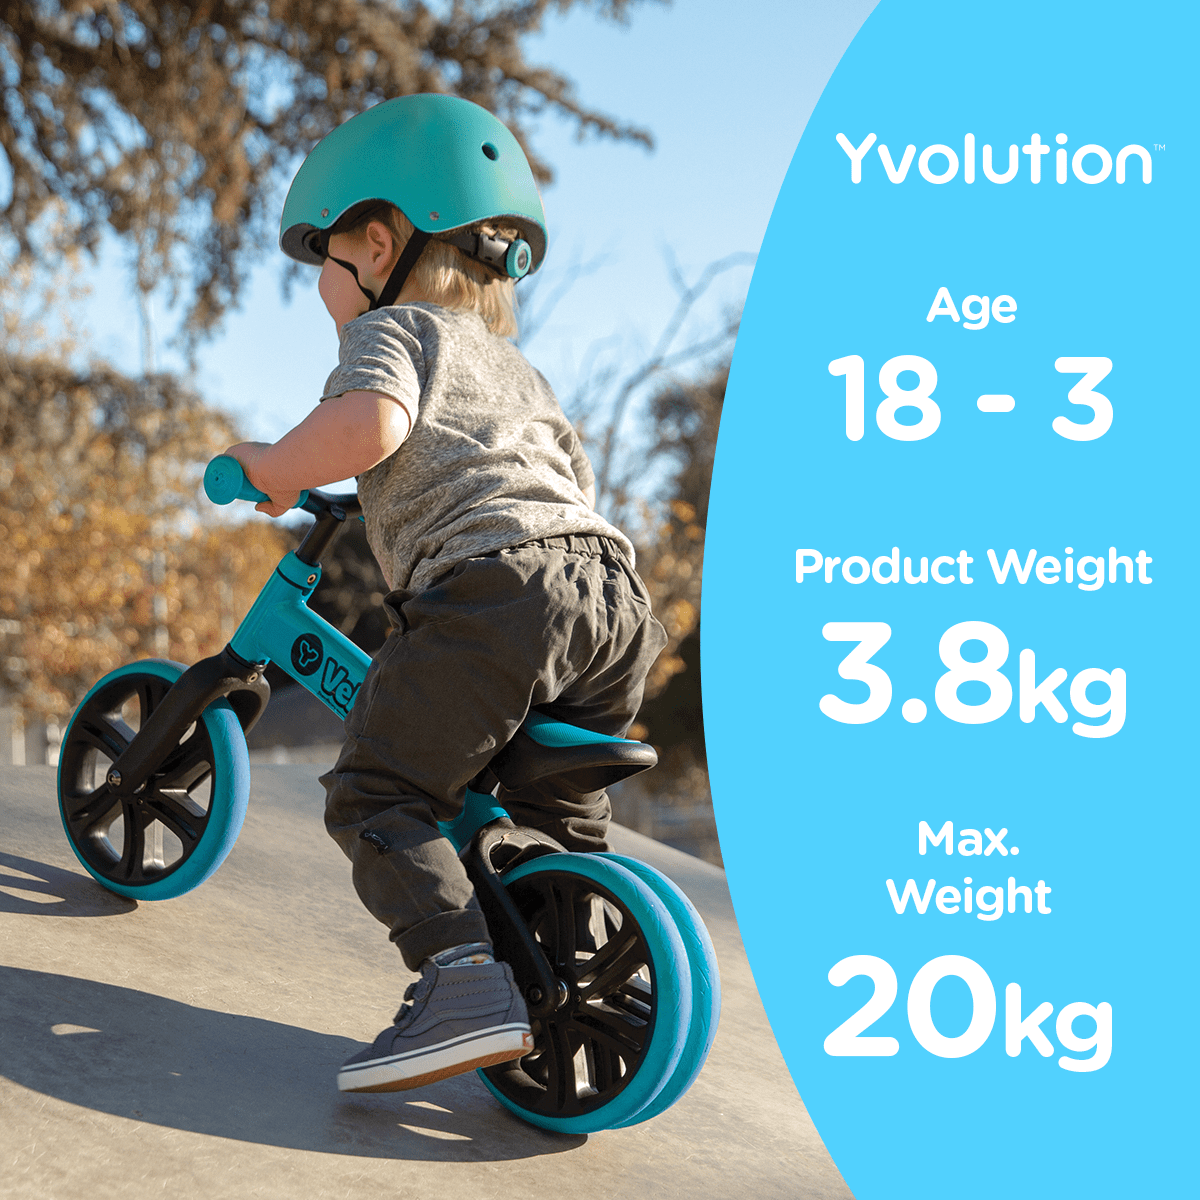 Yvolution Velo Toddler Balance Bike 9\'\' Wheel (Blue) Boys and Girls, 18  Months to 3 Years Old